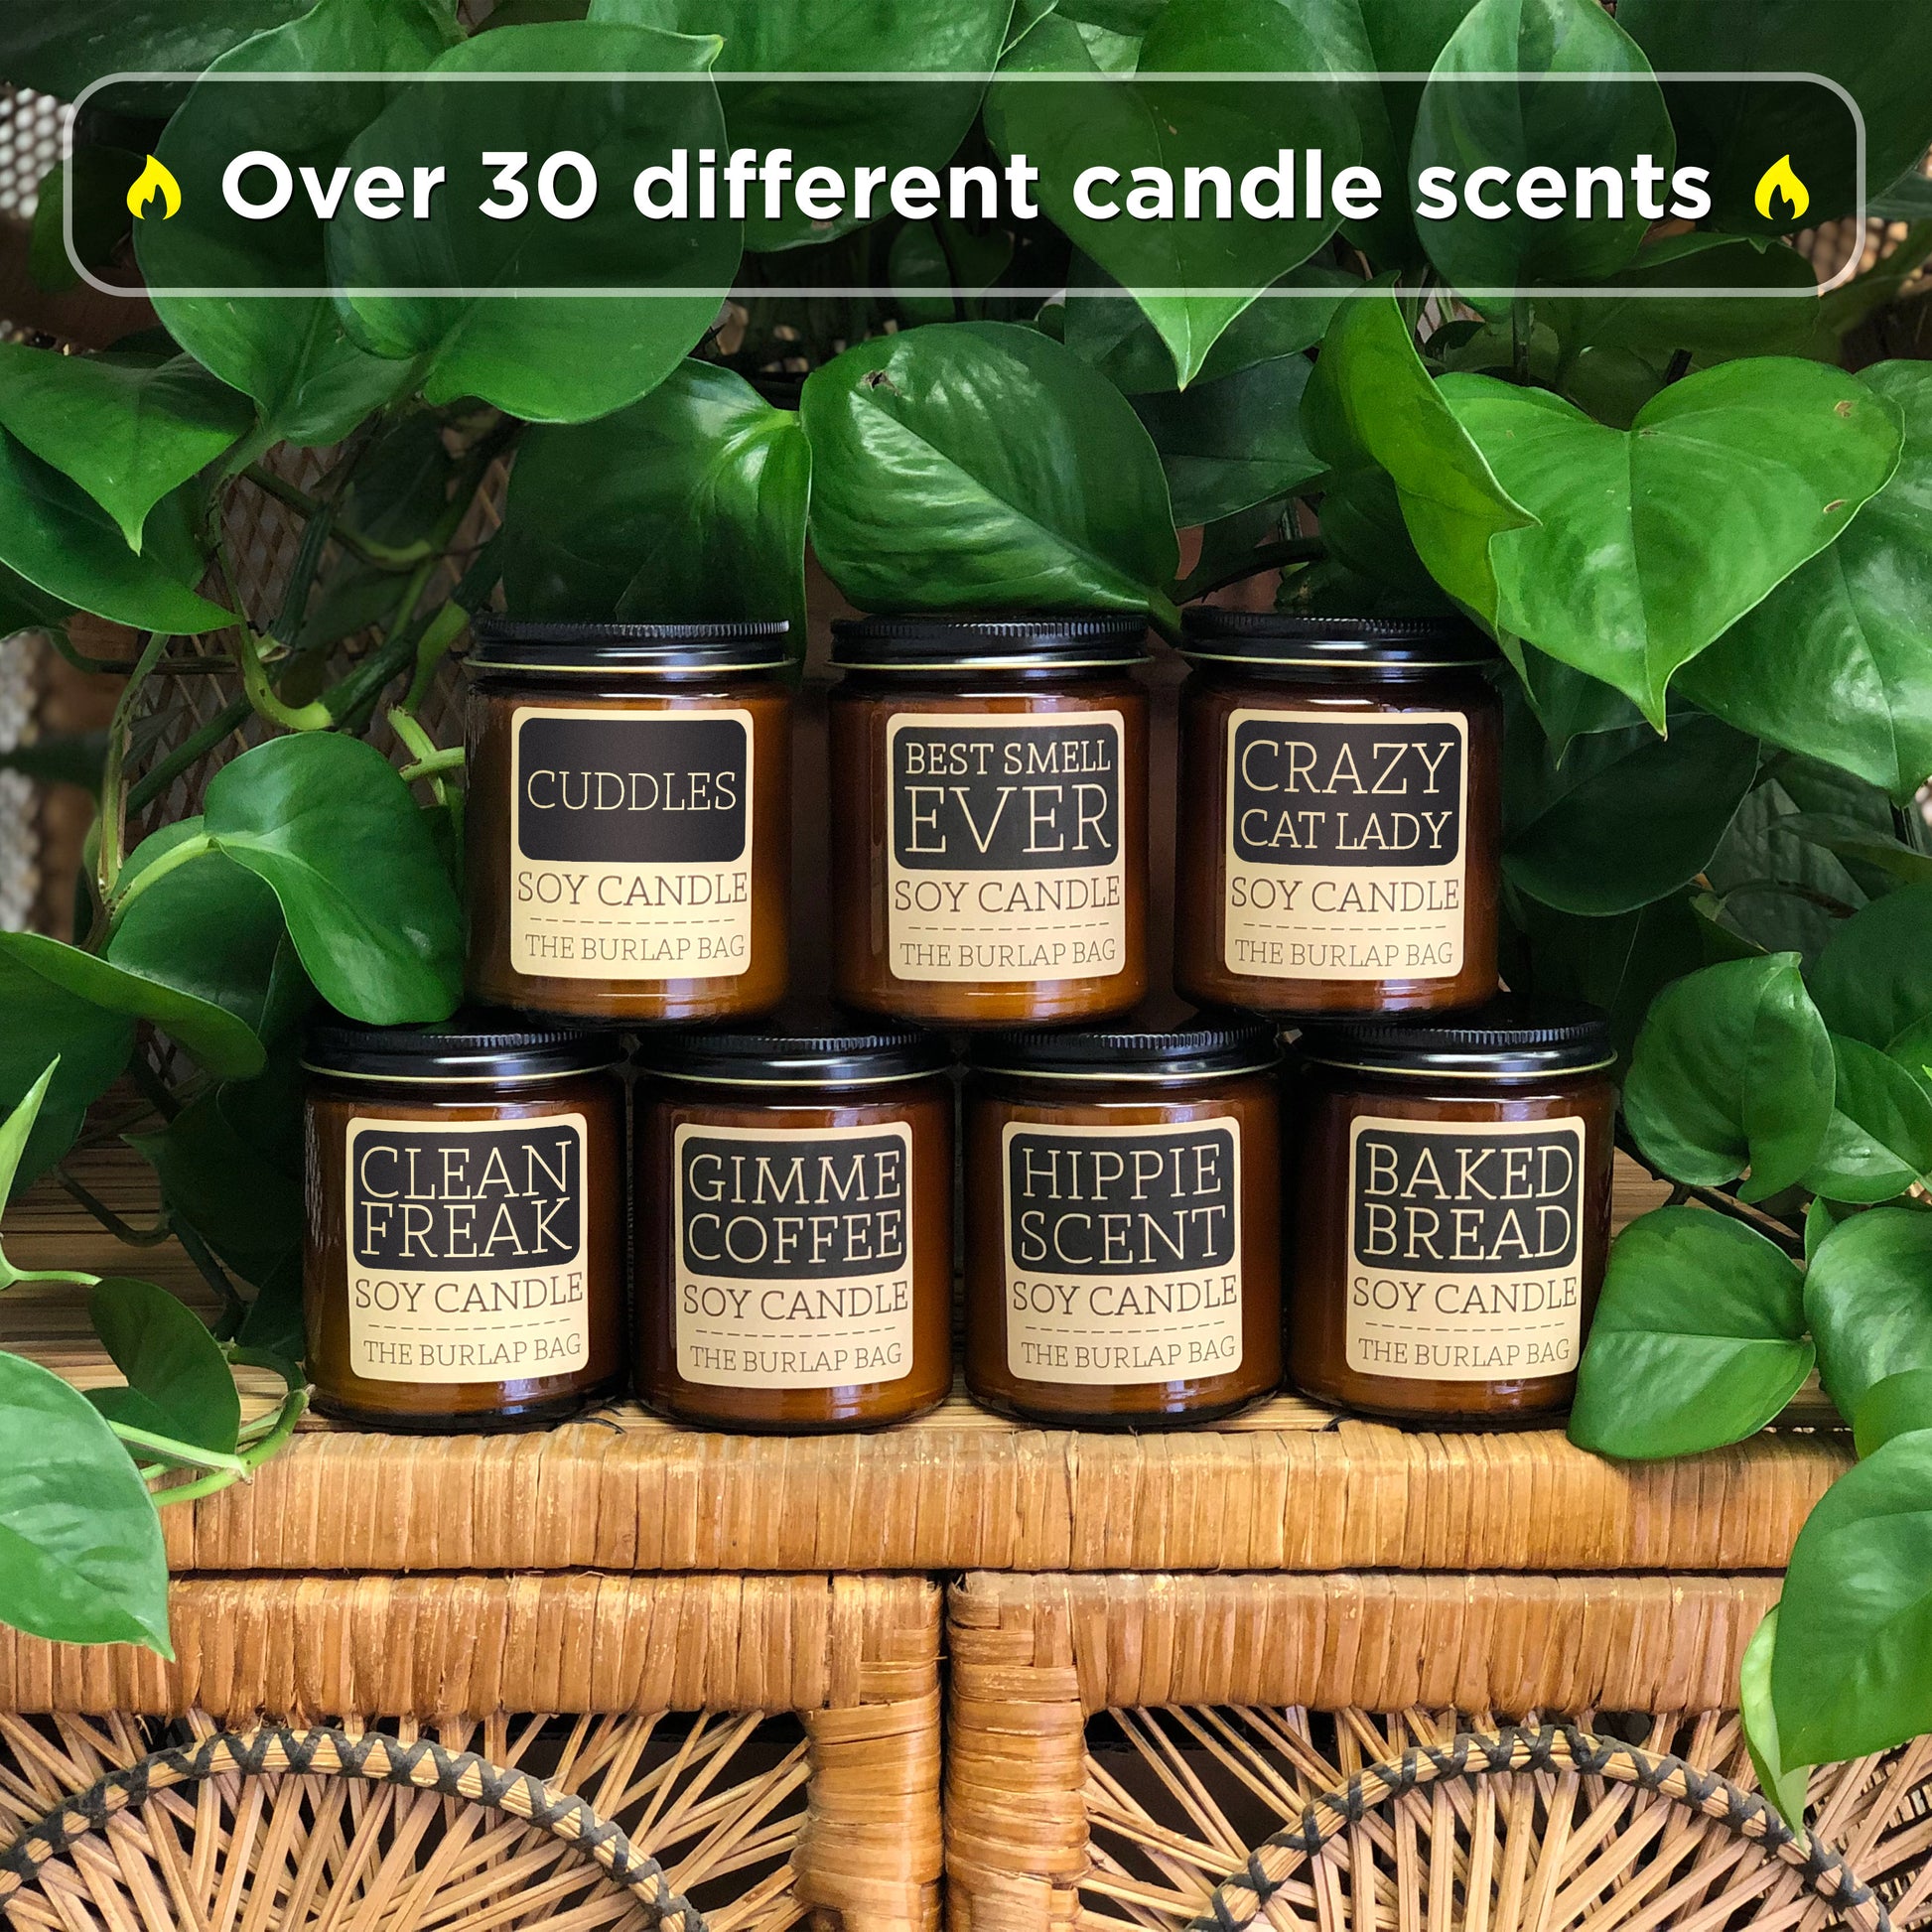 Buy online Hippie Highly Scented Candles Gift Set, Hippie Accessories from  Candle Holders for Unisex by Sosa Candles for ₹699 at 46% off